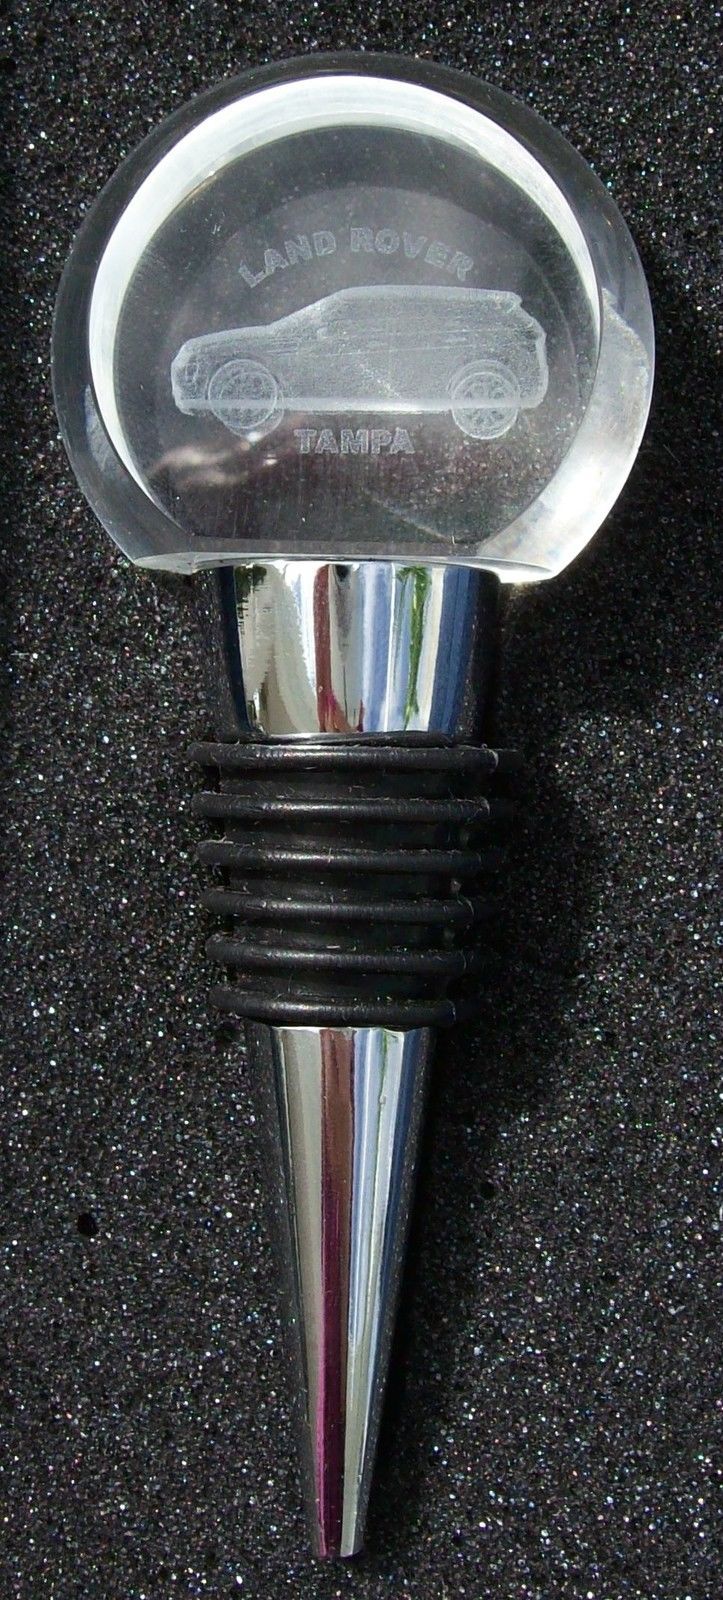 BRAND NEW Tampa Land Rover Crystal Bottle Stopper~The Perfect Gift~Mint In Box - $30.37